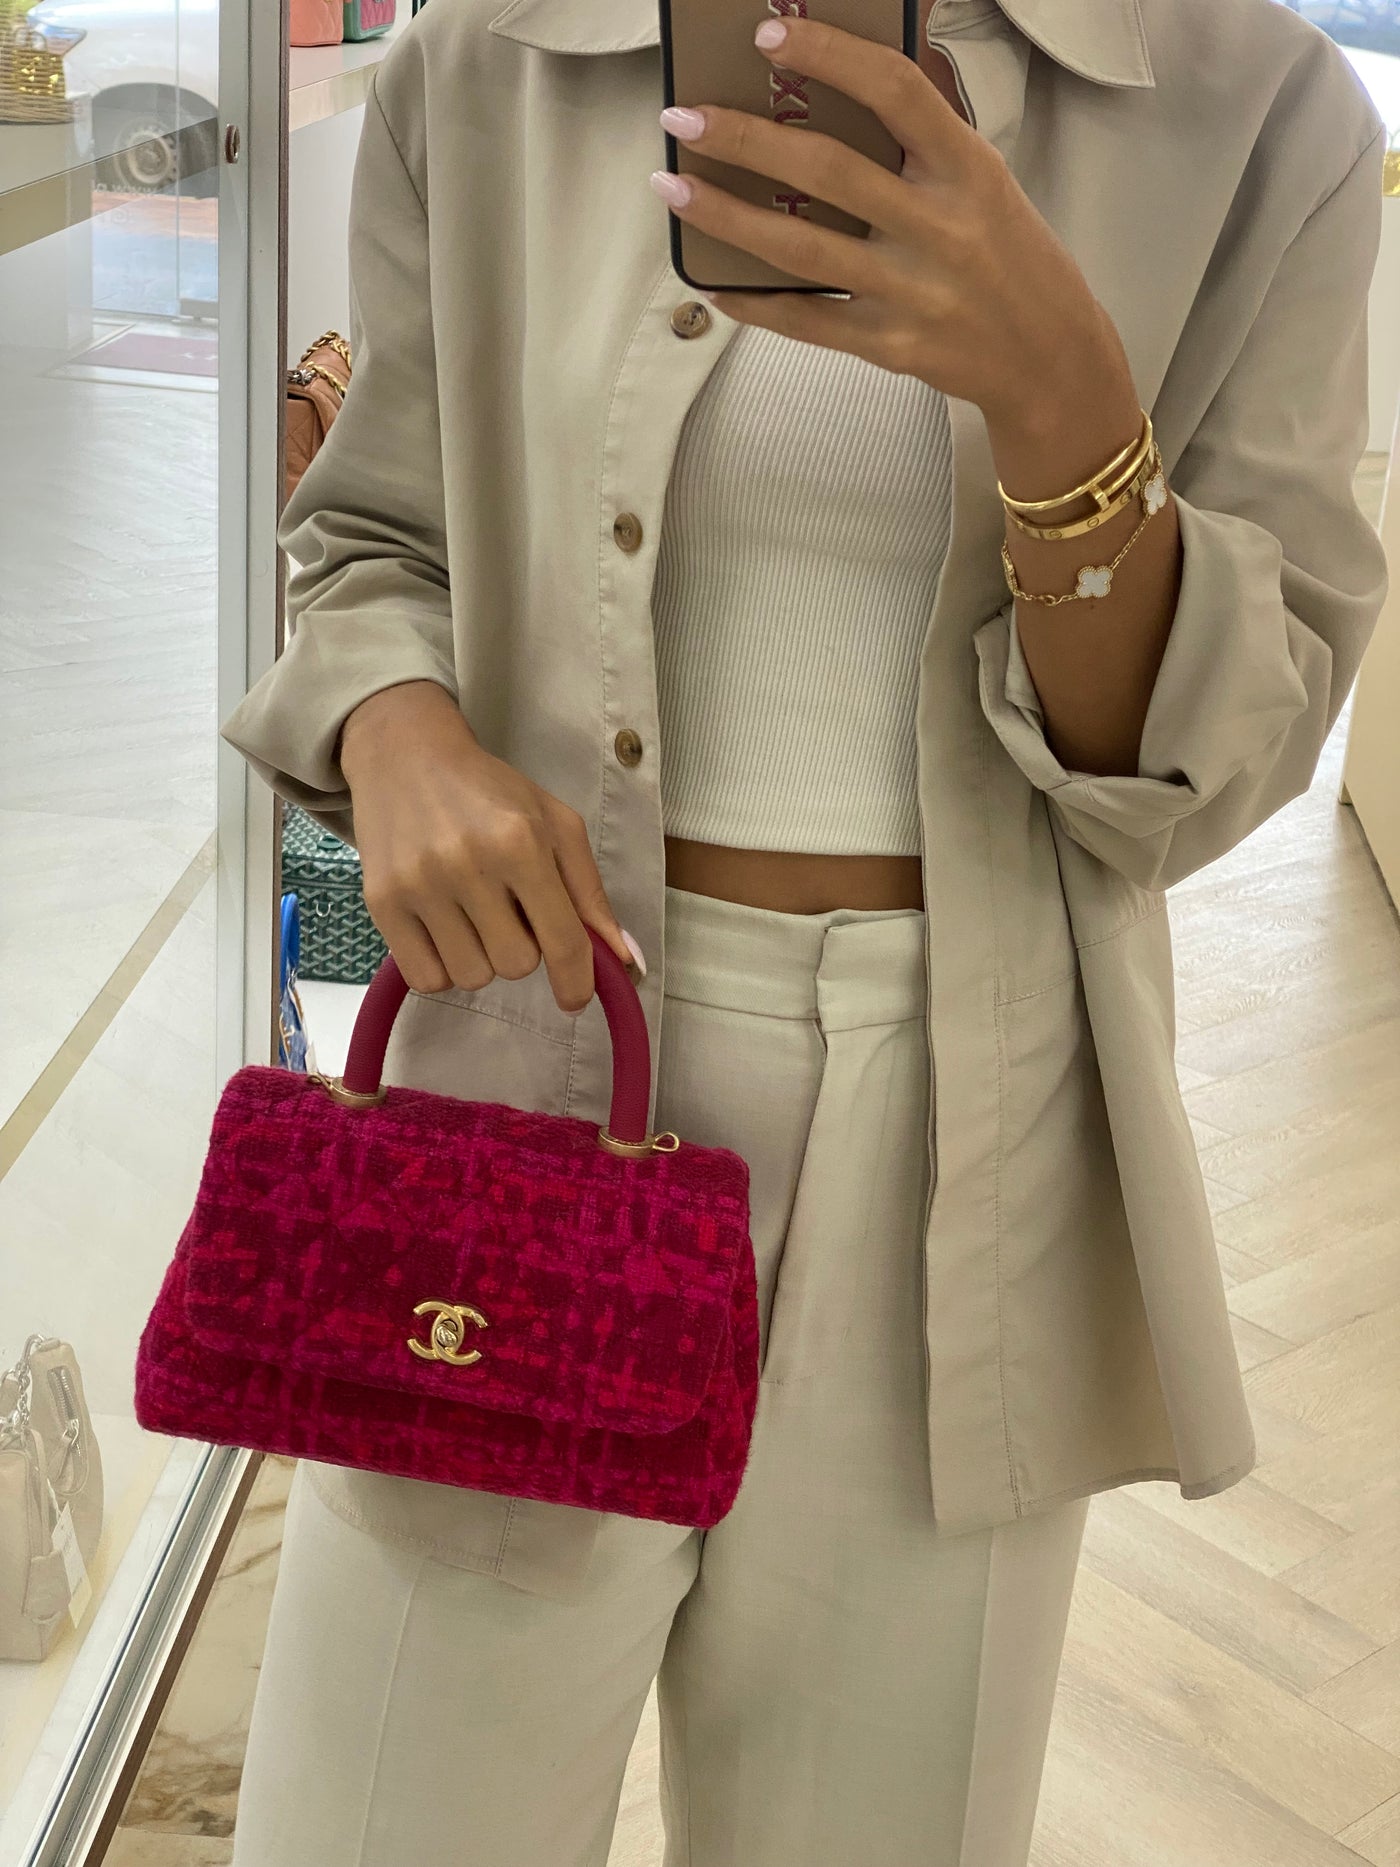 Chanel Coco Handle Red/Pink Tweed GHW